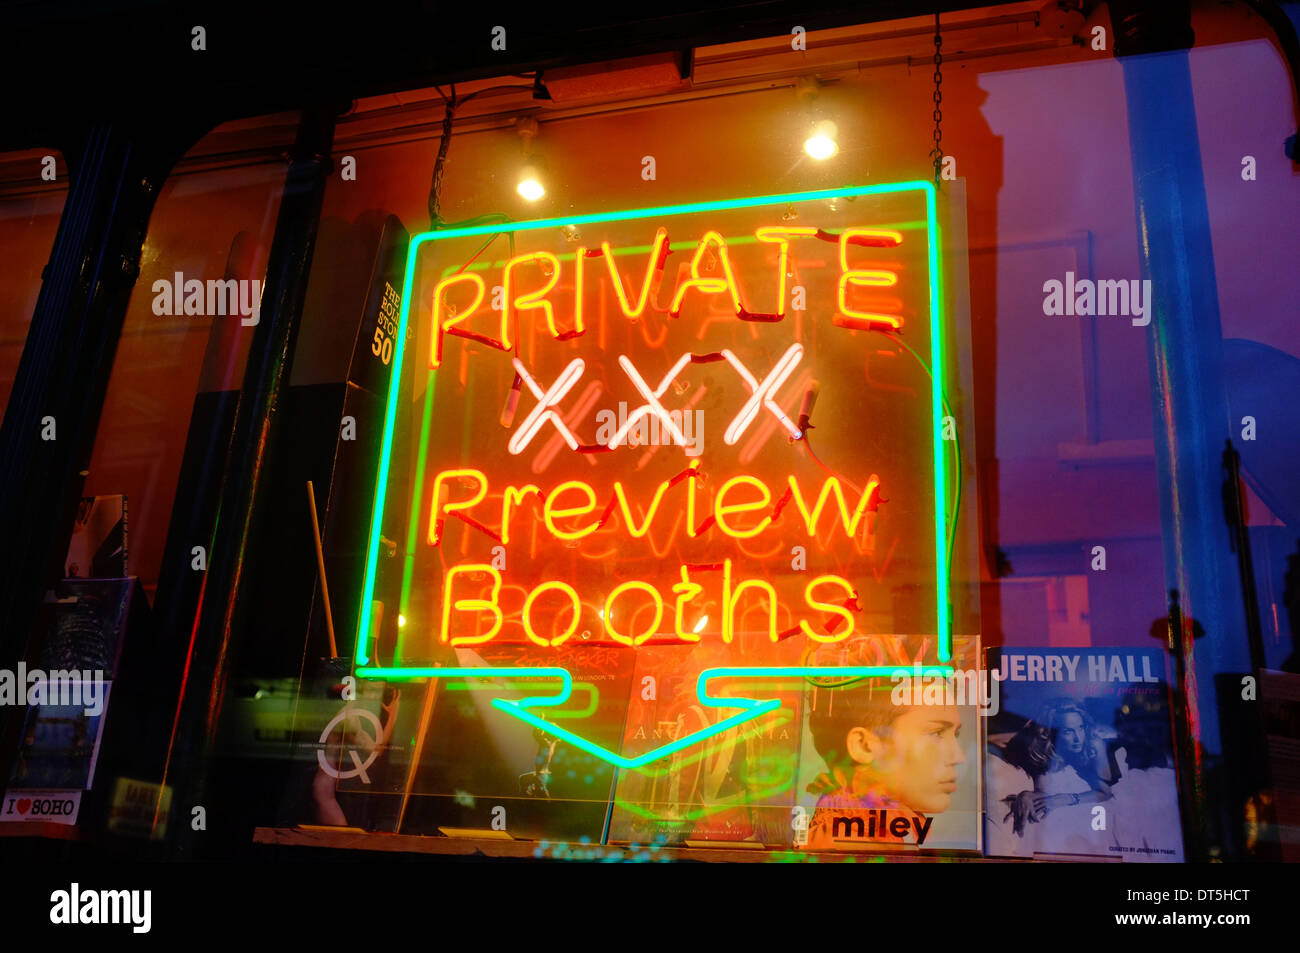 Neon Sign of Adult Bookstore in Soho image picture